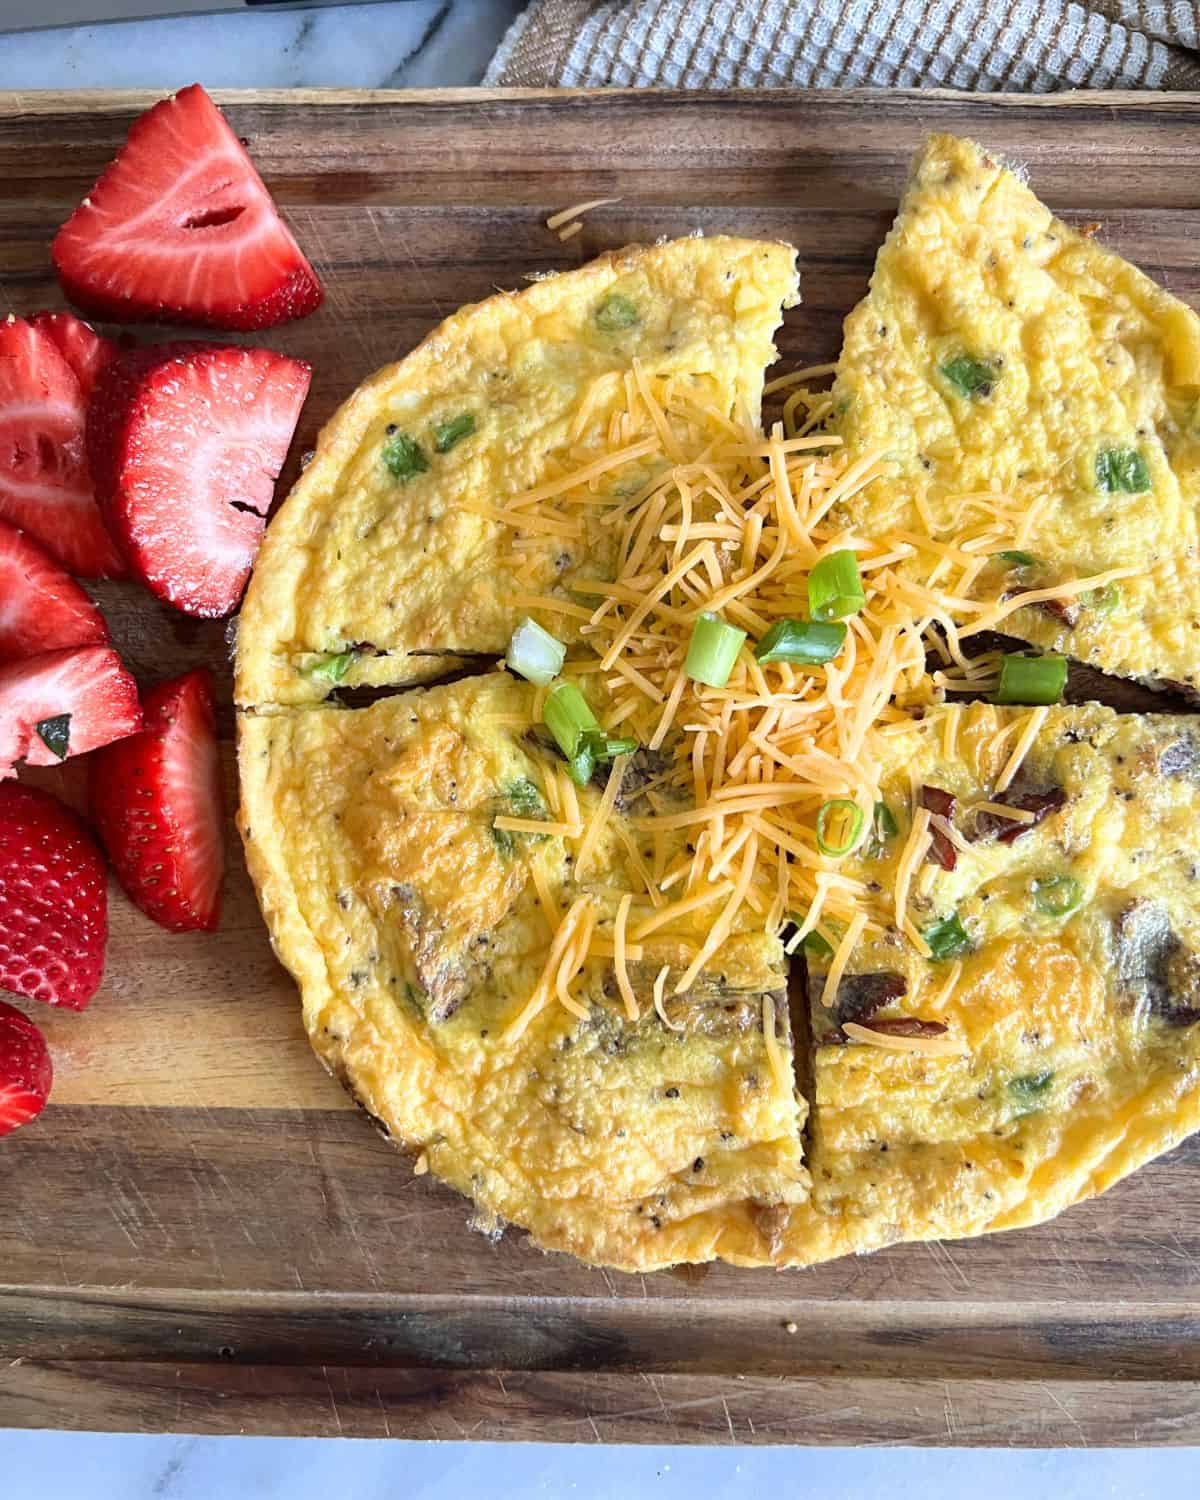 Finished air fried omelette topped with cheese and scallions next to strawberries. 